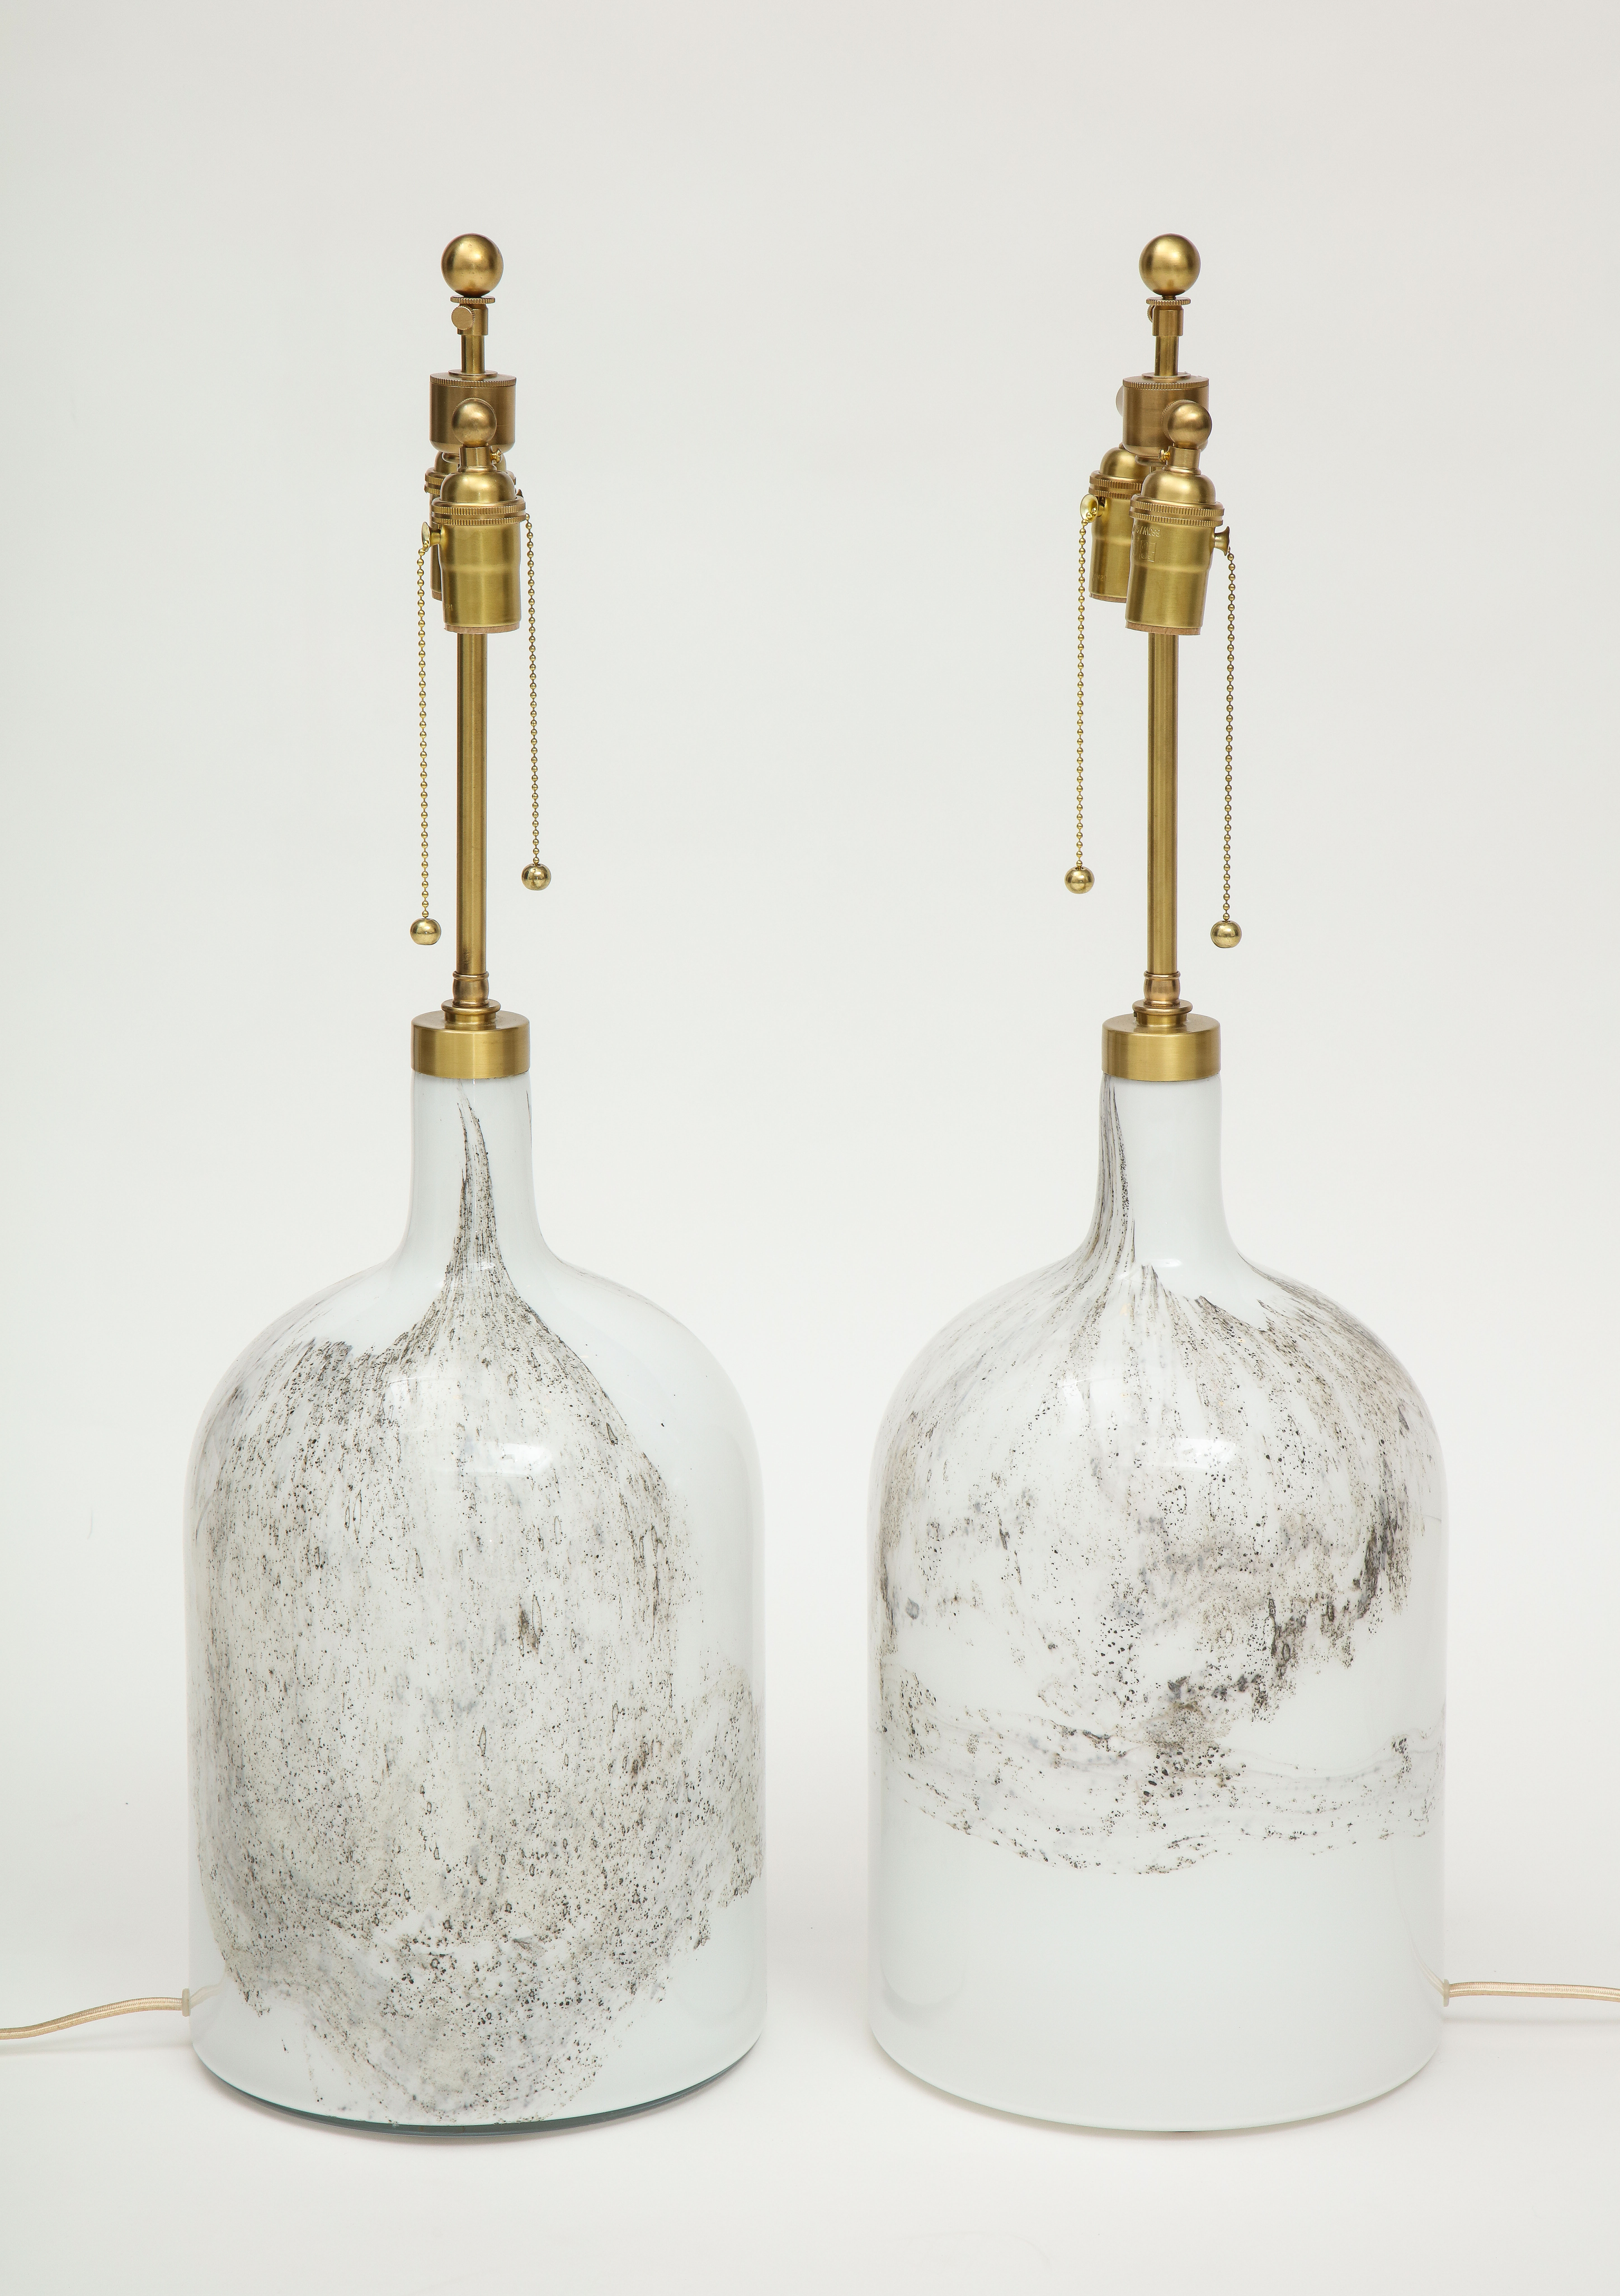 Pair of Holmegaard lamps, Designed by Michael Bang